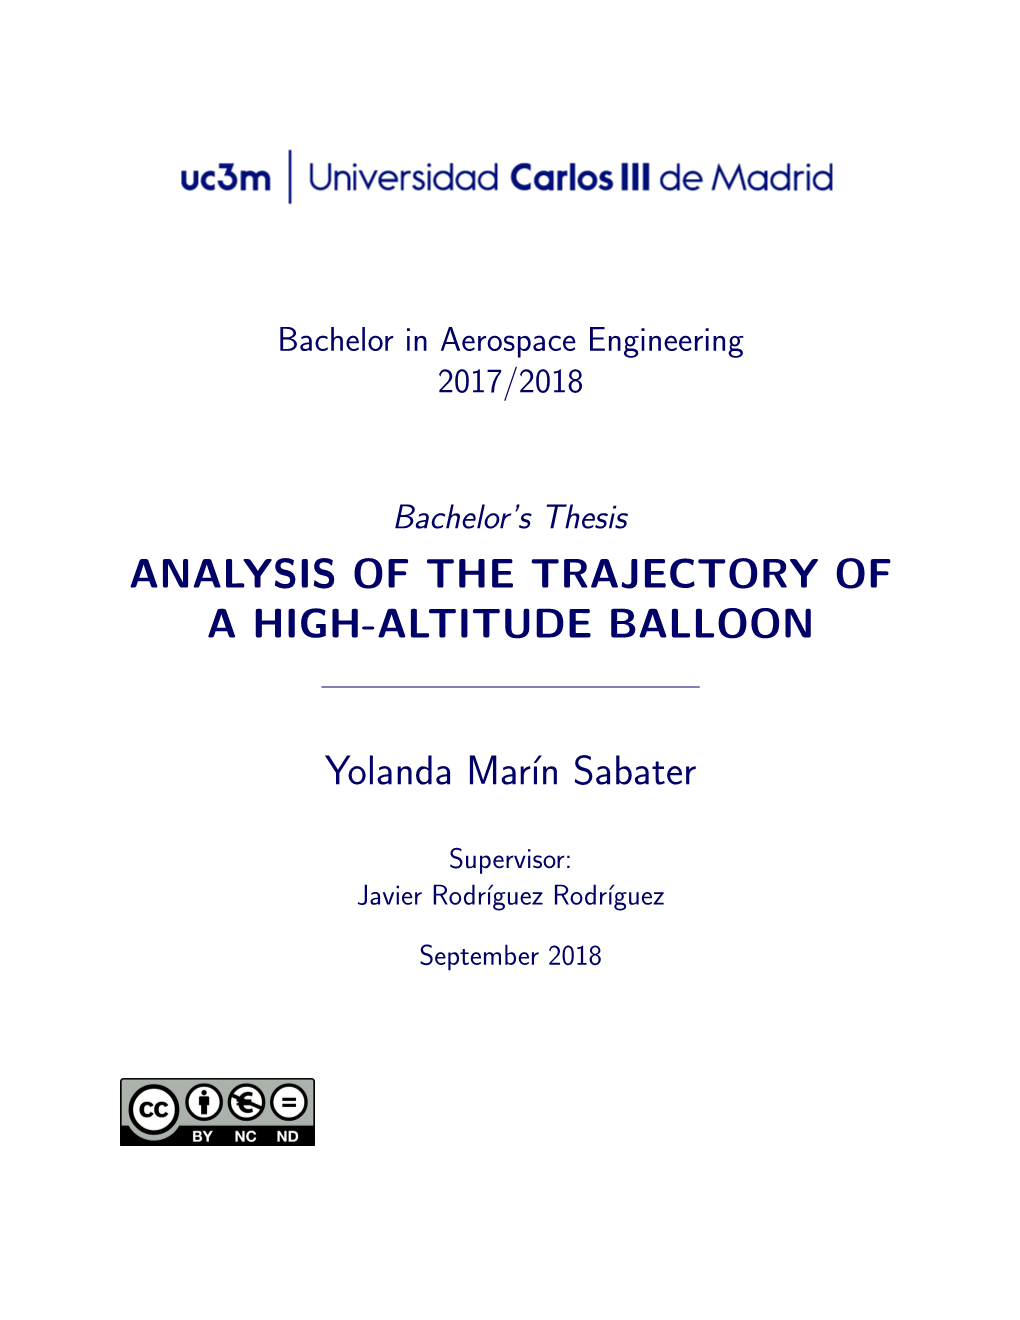 Analysis of the Trajectory of a High-Altitude Balloon